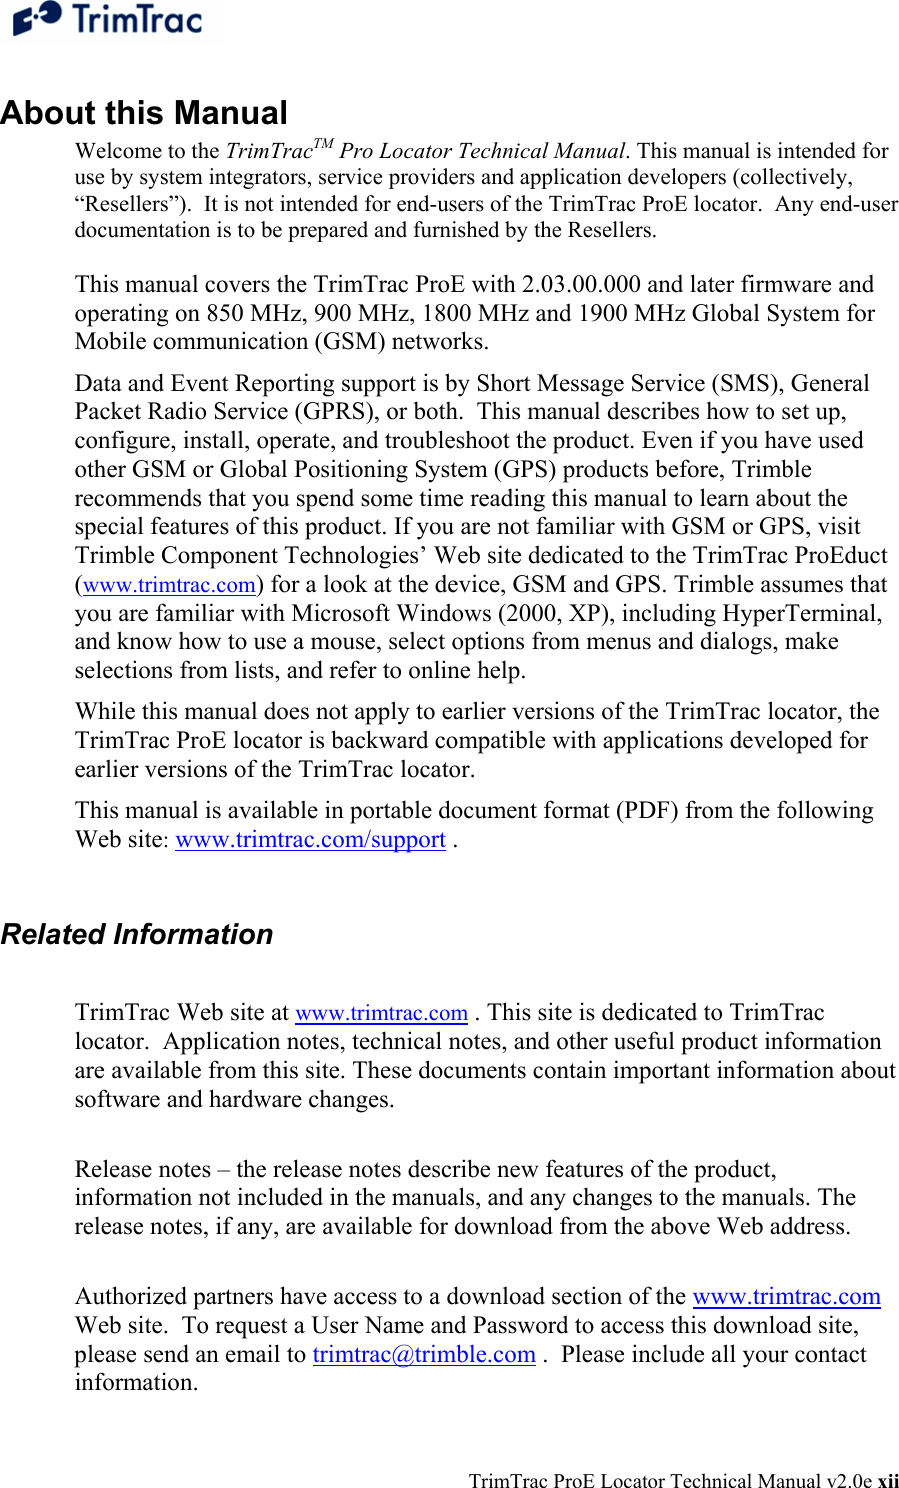  TrimTrac ProE Locator Technical Manual v2.0e xii About this Manual Welcome to the TrimTracTM Pro Locator Technical Manual. This manual is intended for use by system integrators, service providers and application developers (collectively, “Resellers”).  It is not intended for end-users of the TrimTrac ProE locator.  Any end-user documentation is to be prepared and furnished by the Resellers.  This manual covers the TrimTrac ProE with 2.03.00.000 and later firmware and operating on 850 MHz, 900 MHz, 1800 MHz and 1900 MHz Global System for Mobile communication (GSM) networks.  Data and Event Reporting support is by Short Message Service (SMS), General Packet Radio Service (GPRS), or both.  This manual describes how to set up, configure, install, operate, and troubleshoot the product. Even if you have used other GSM or Global Positioning System (GPS) products before, Trimble recommends that you spend some time reading this manual to learn about the special features of this product. If you are not familiar with GSM or GPS, visit Trimble Component Technologies’ Web site dedicated to the TrimTrac ProEduct (www.trimtrac.com) for a look at the device, GSM and GPS. Trimble assumes that you are familiar with Microsoft Windows (2000, XP), including HyperTerminal, and know how to use a mouse, select options from menus and dialogs, make selections from lists, and refer to online help. While this manual does not apply to earlier versions of the TrimTrac locator, the TrimTrac ProE locator is backward compatible with applications developed for earlier versions of the TrimTrac locator.   This manual is available in portable document format (PDF) from the following Web site: www.trimtrac.com/support .  Related Information  TrimTrac Web site at www.trimtrac.com . This site is dedicated to TrimTrac locator.  Application notes, technical notes, and other useful product information are available from this site. These documents contain important information about software and hardware changes.   Release notes – the release notes describe new features of the product, information not included in the manuals, and any changes to the manuals. The release notes, if any, are available for download from the above Web address.   Authorized partners have access to a download section of the www.trimtrac.com Web site.  To request a User Name and Password to access this download site, please send an email to trimtrac@trimble.com .  Please include all your contact information. 